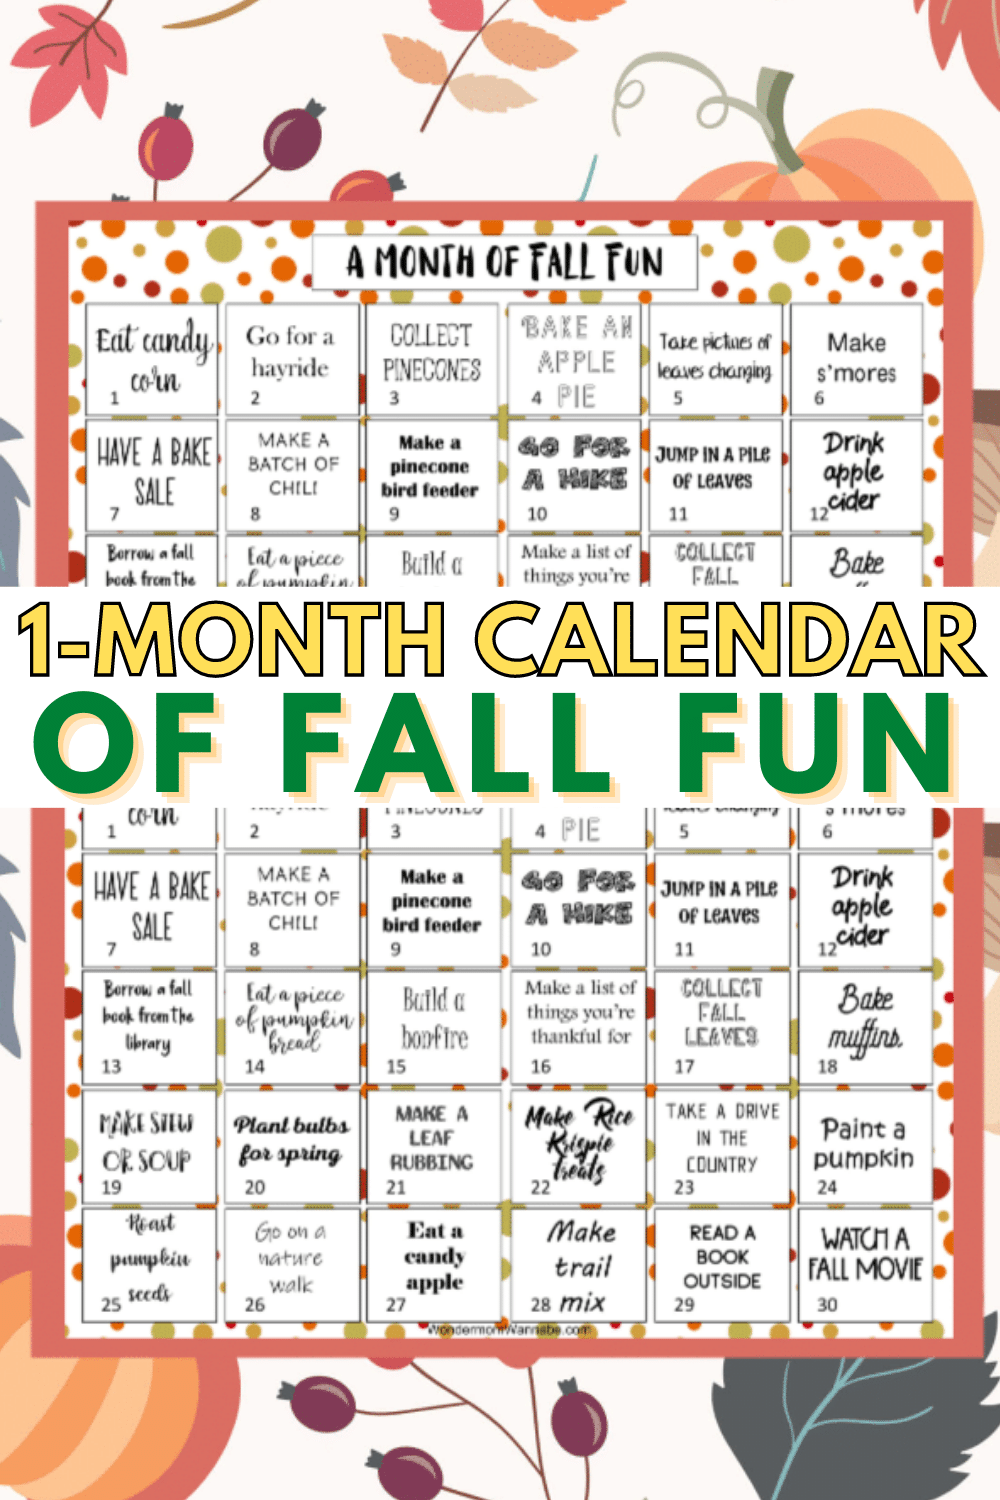 This printable one month calendar of fall activities for kids is the perfect way to have a memorable season full of fun as a family. #printables #fall #kidsactivities via @wondermomwannab